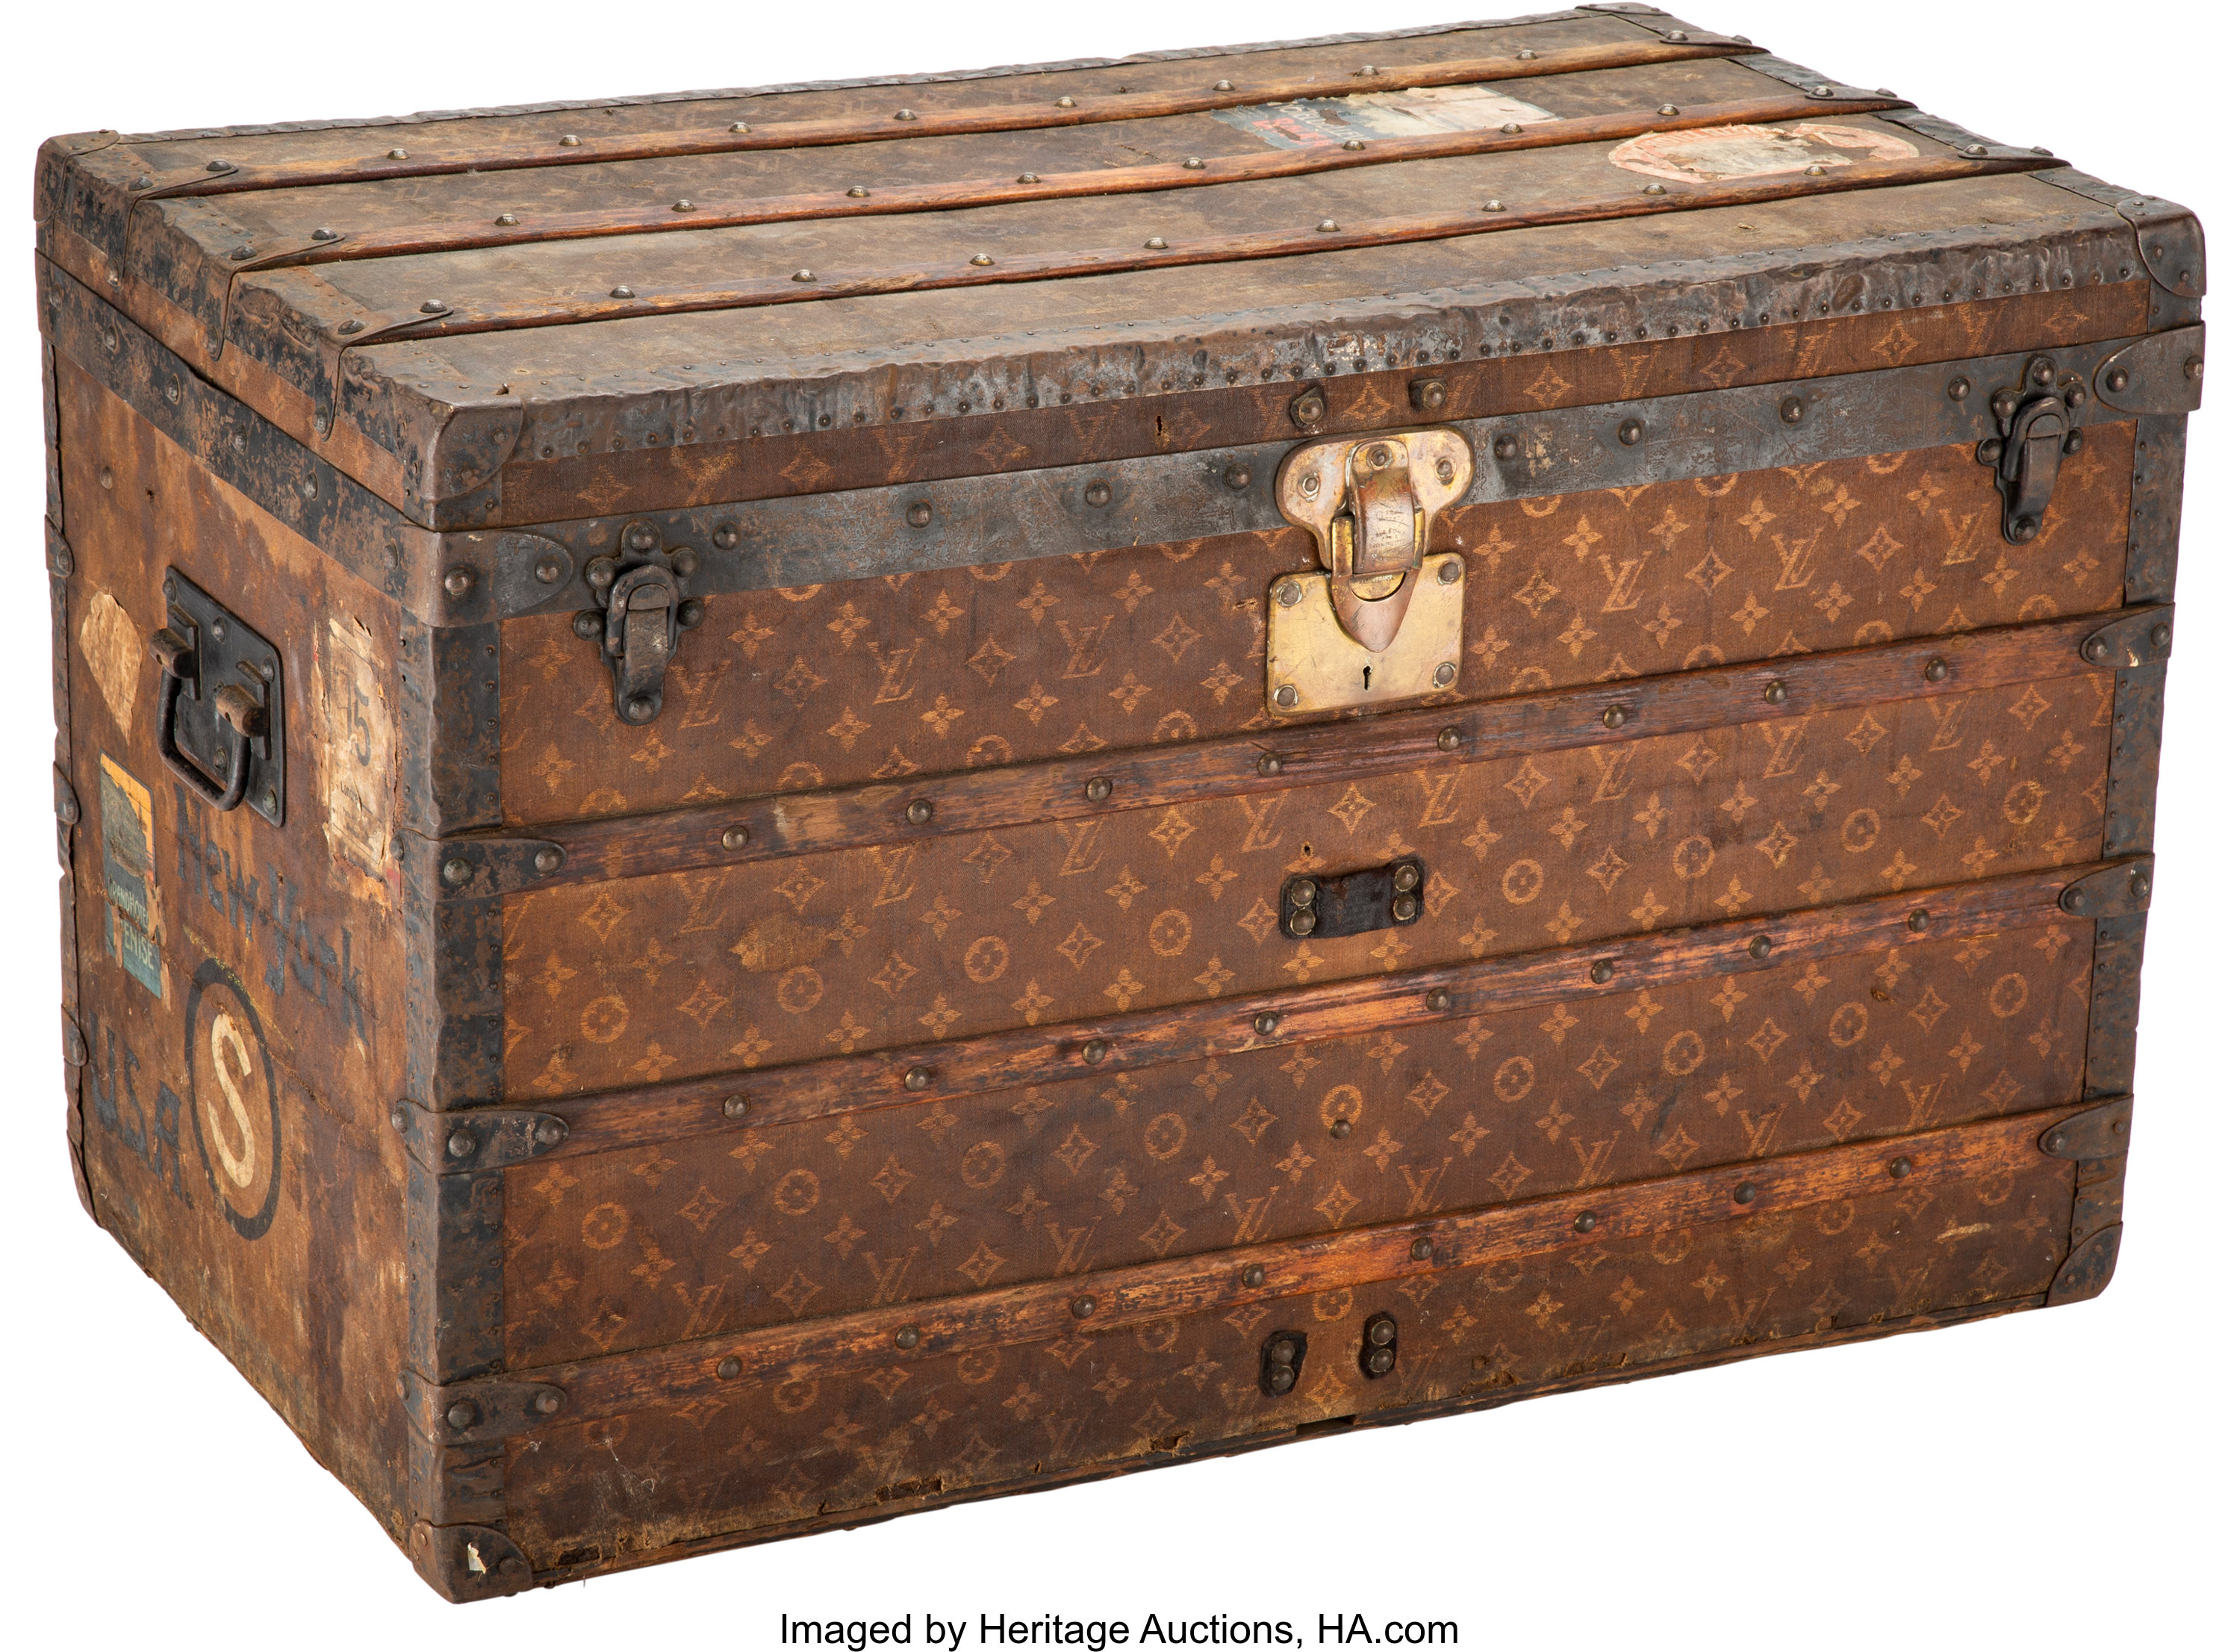 A Vintage Louis Vuitton Monogram Steamer Trunk, early 20th century., Lot  #23289